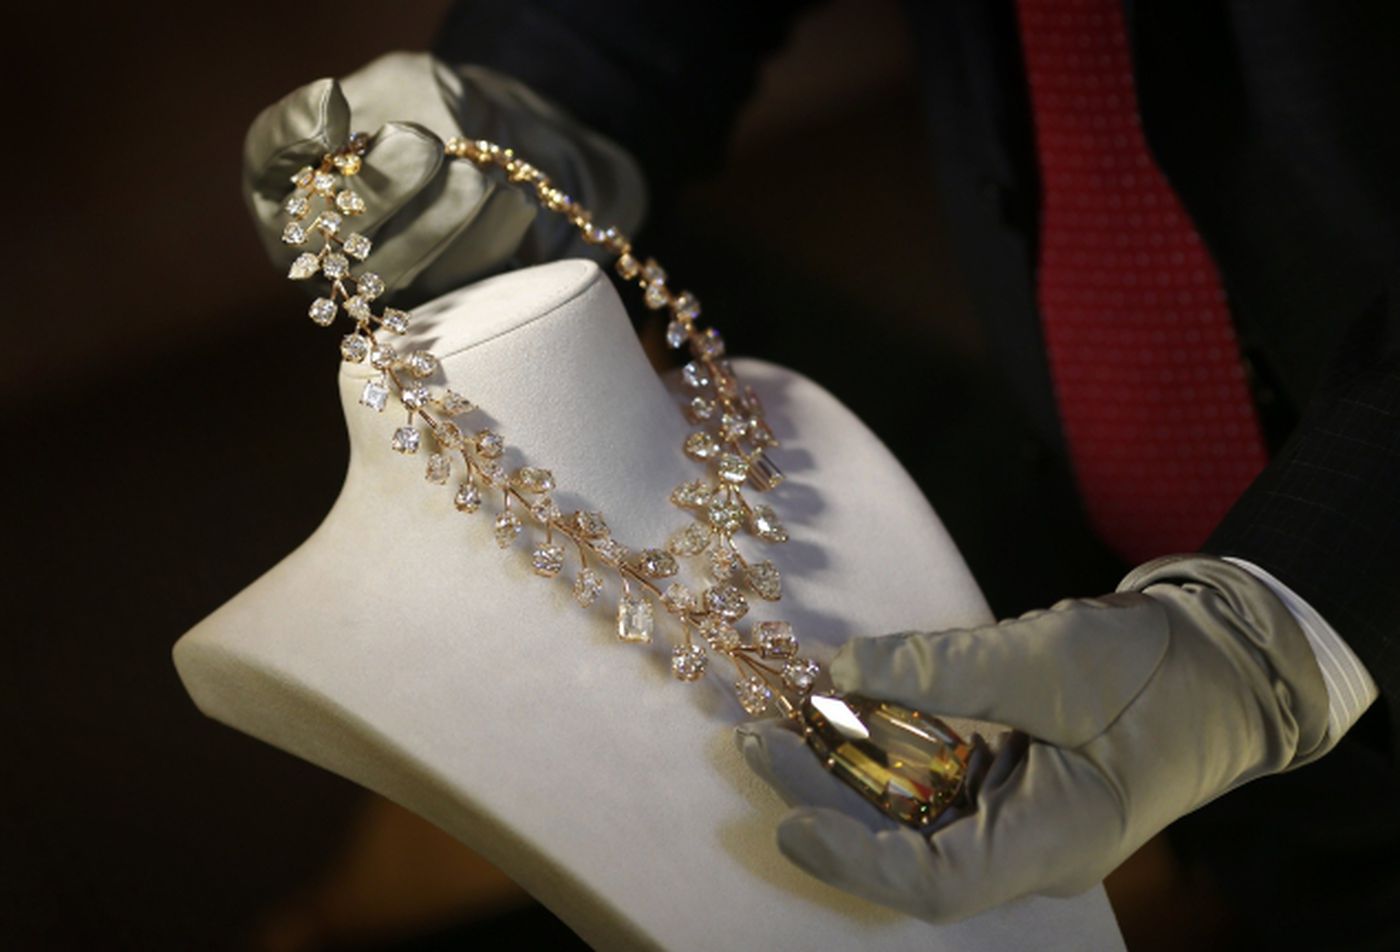 Net Worth To 60 Carat Diamond Chain: Most Expensive Things Owned